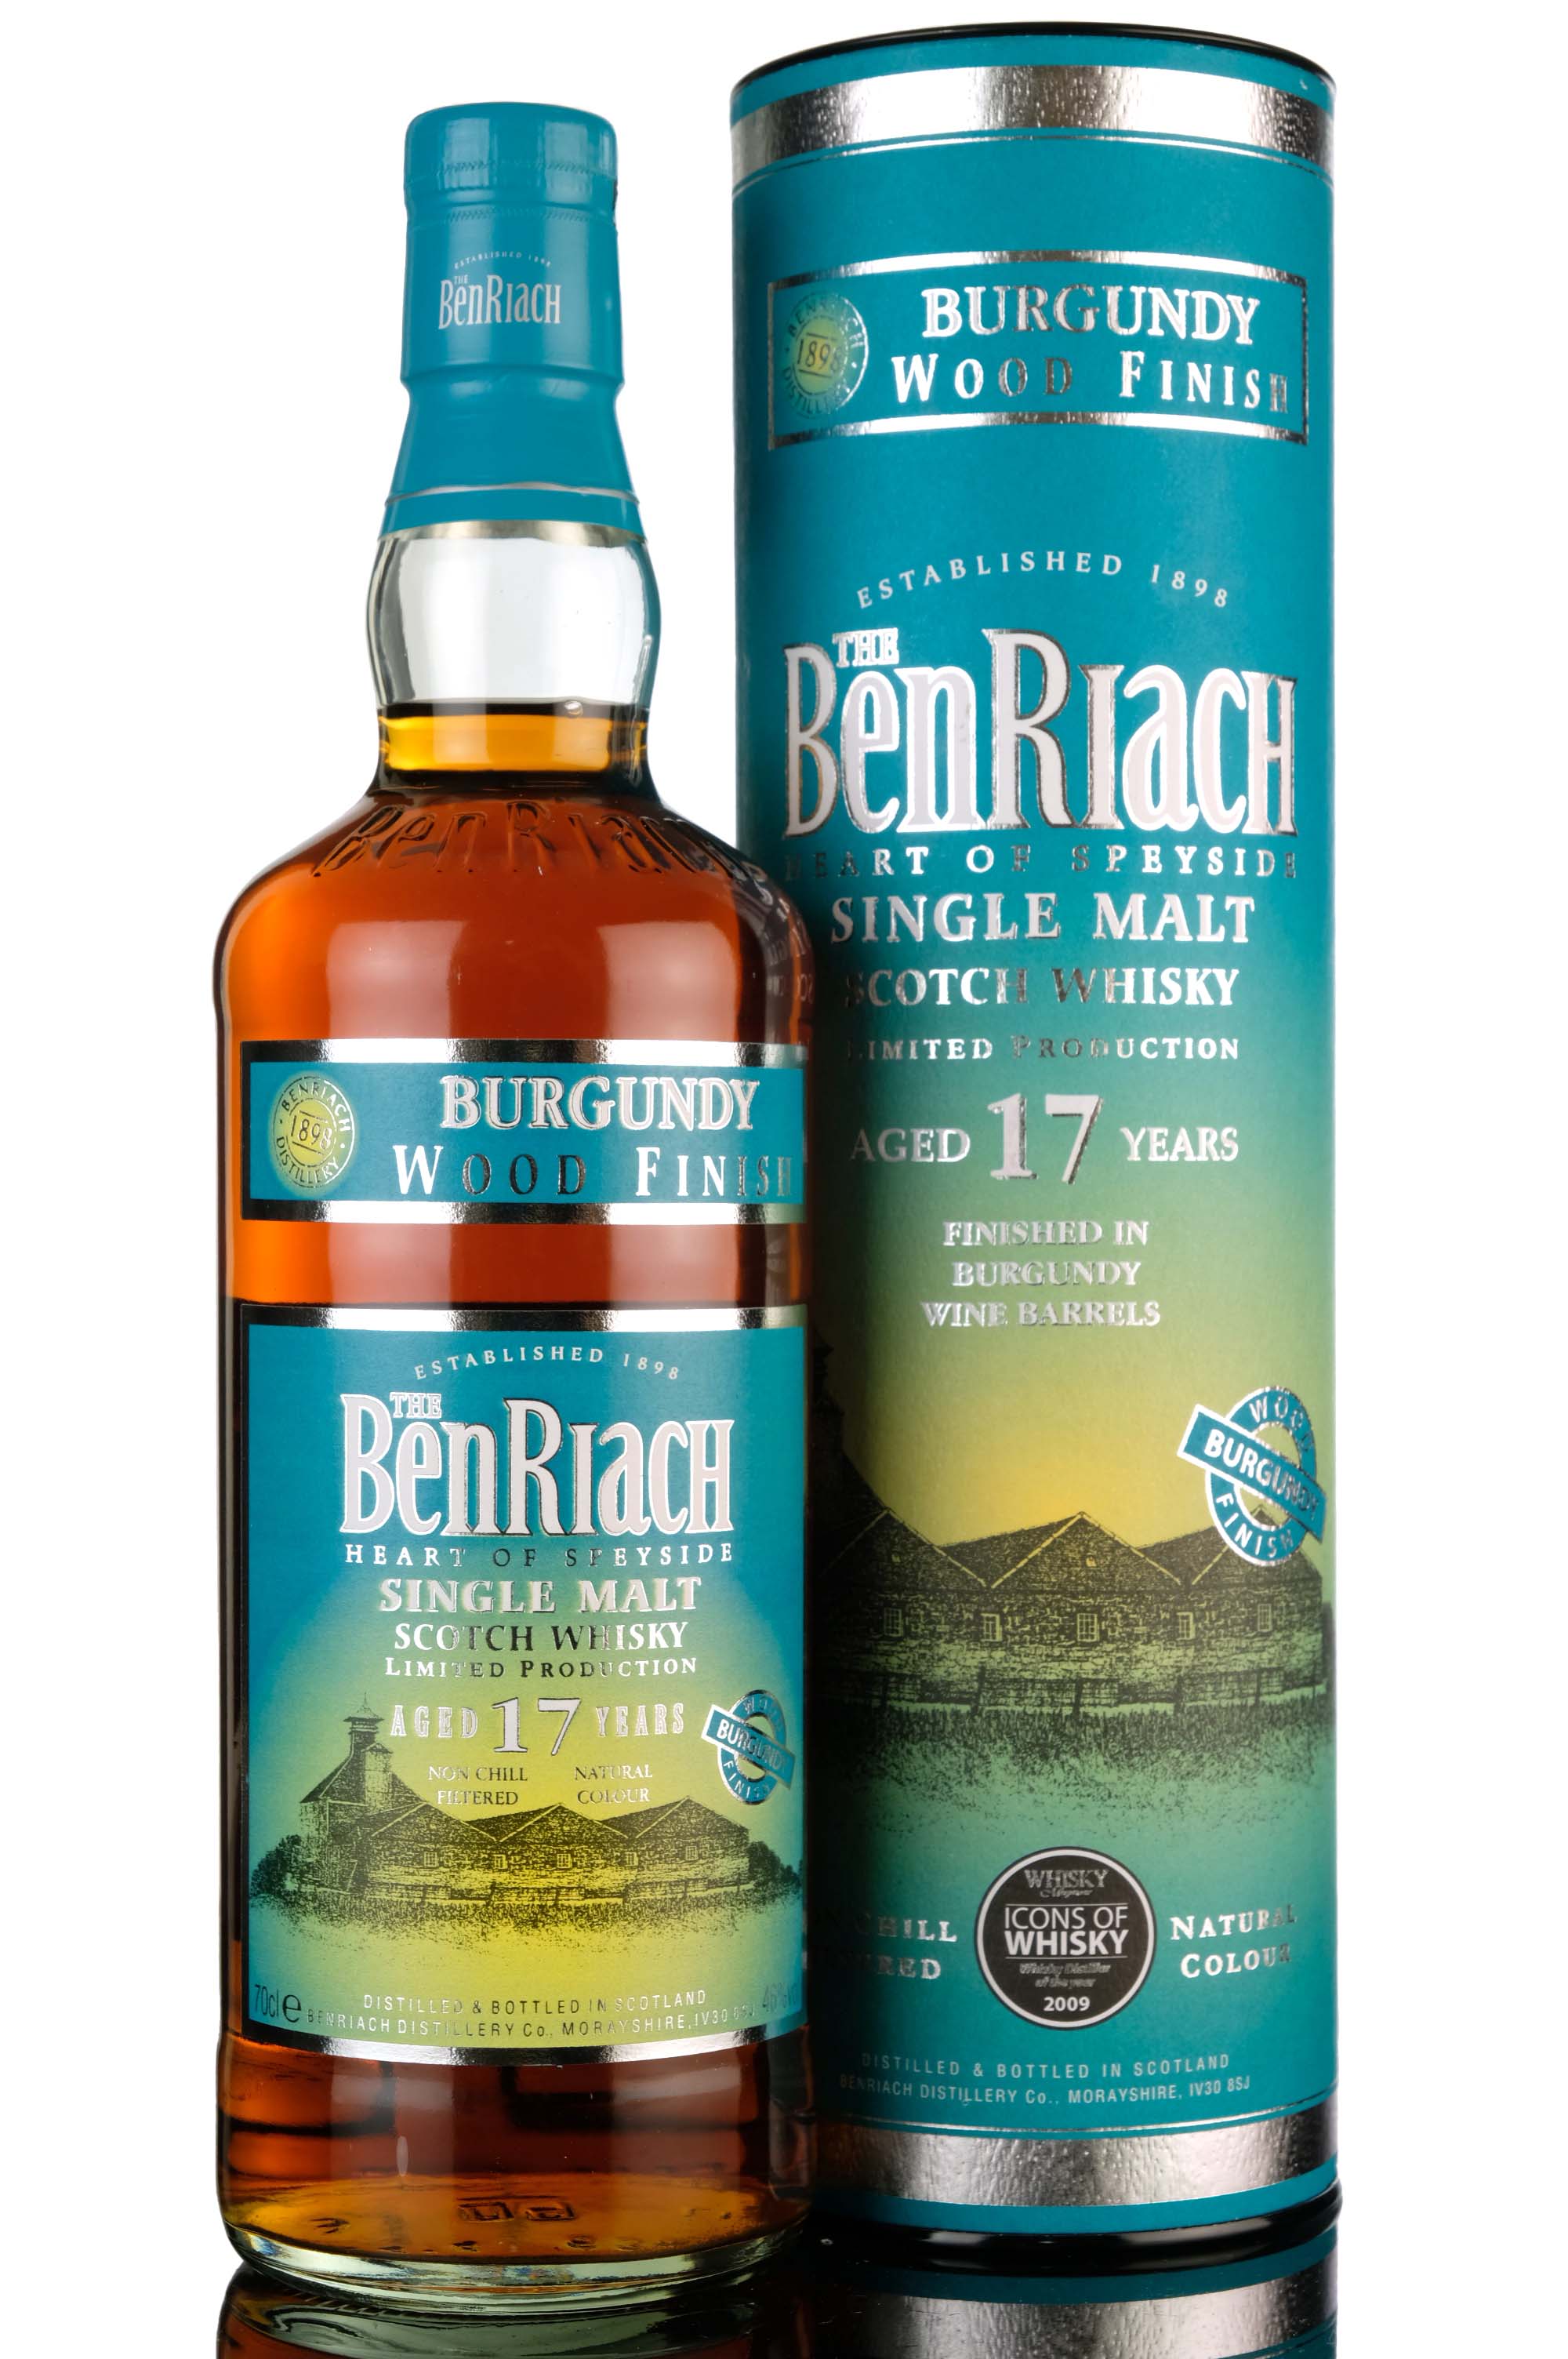 Benriach 17 Year Old - Burgundy Wood Finish - 2010 Release